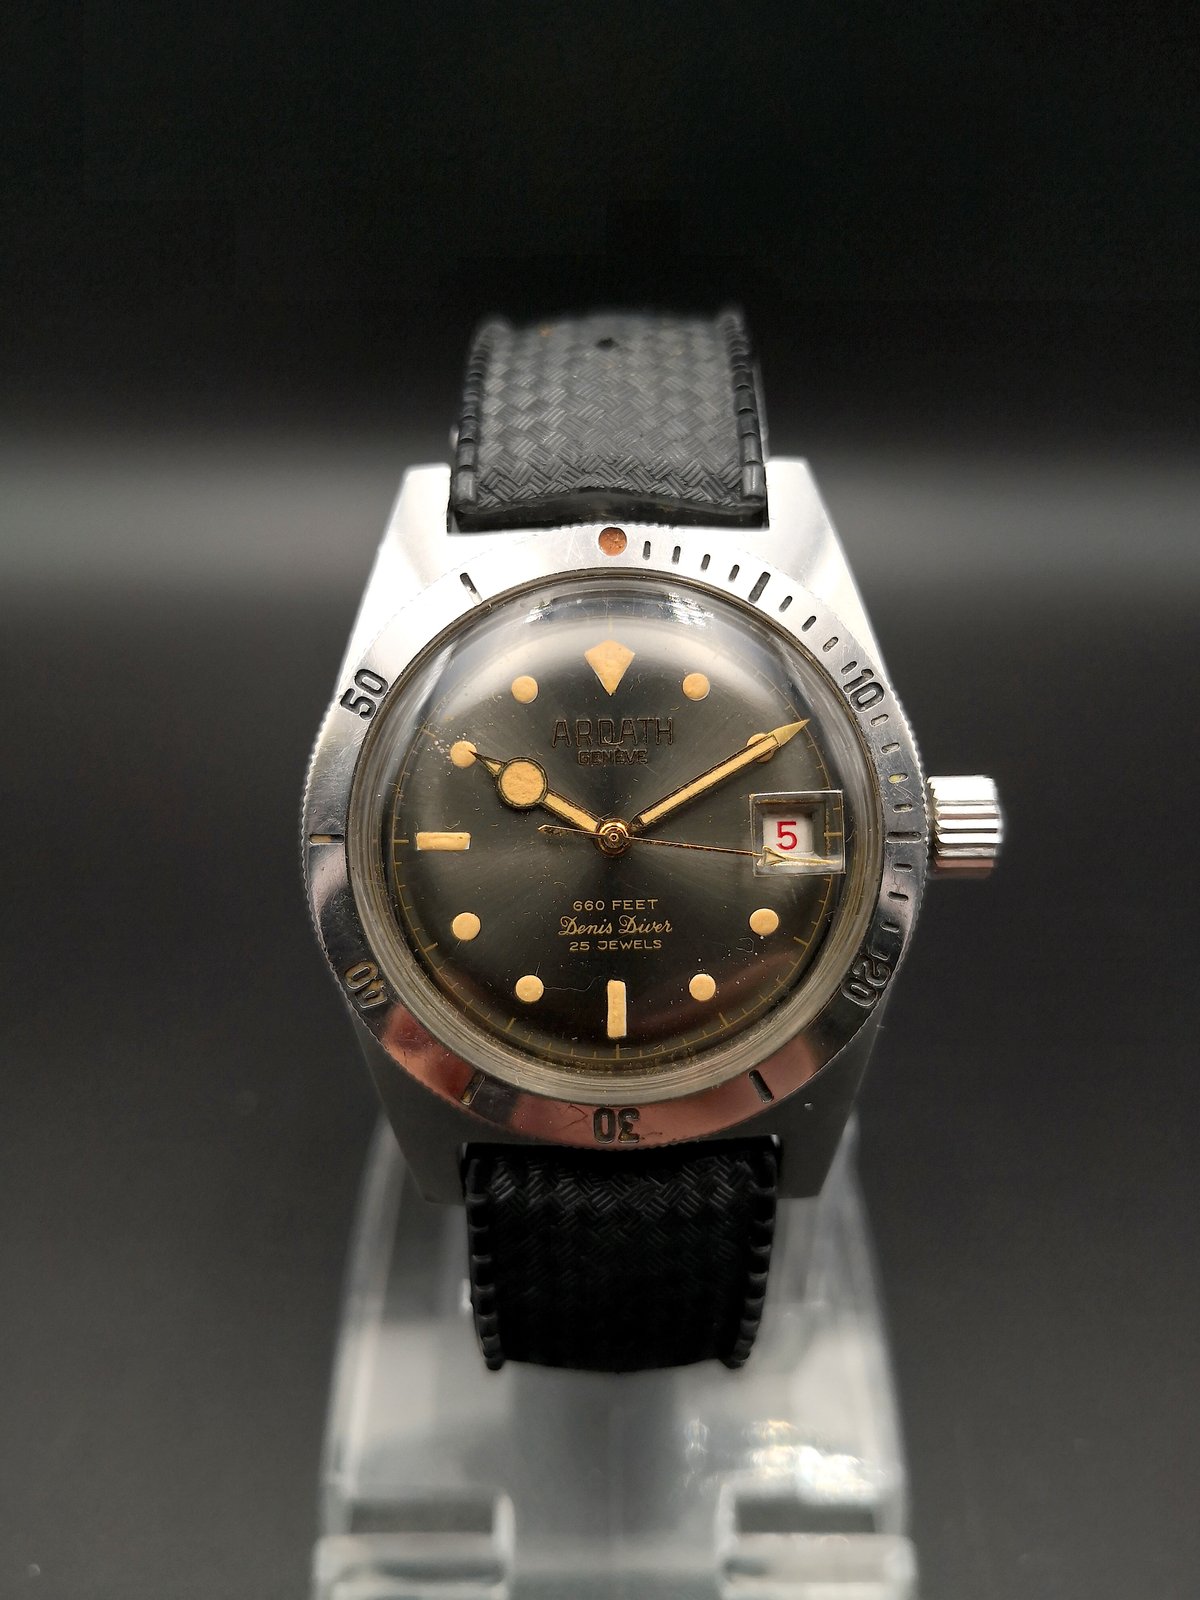 Identifying one of my Father's old watches | WatchUSeek Watch Forums